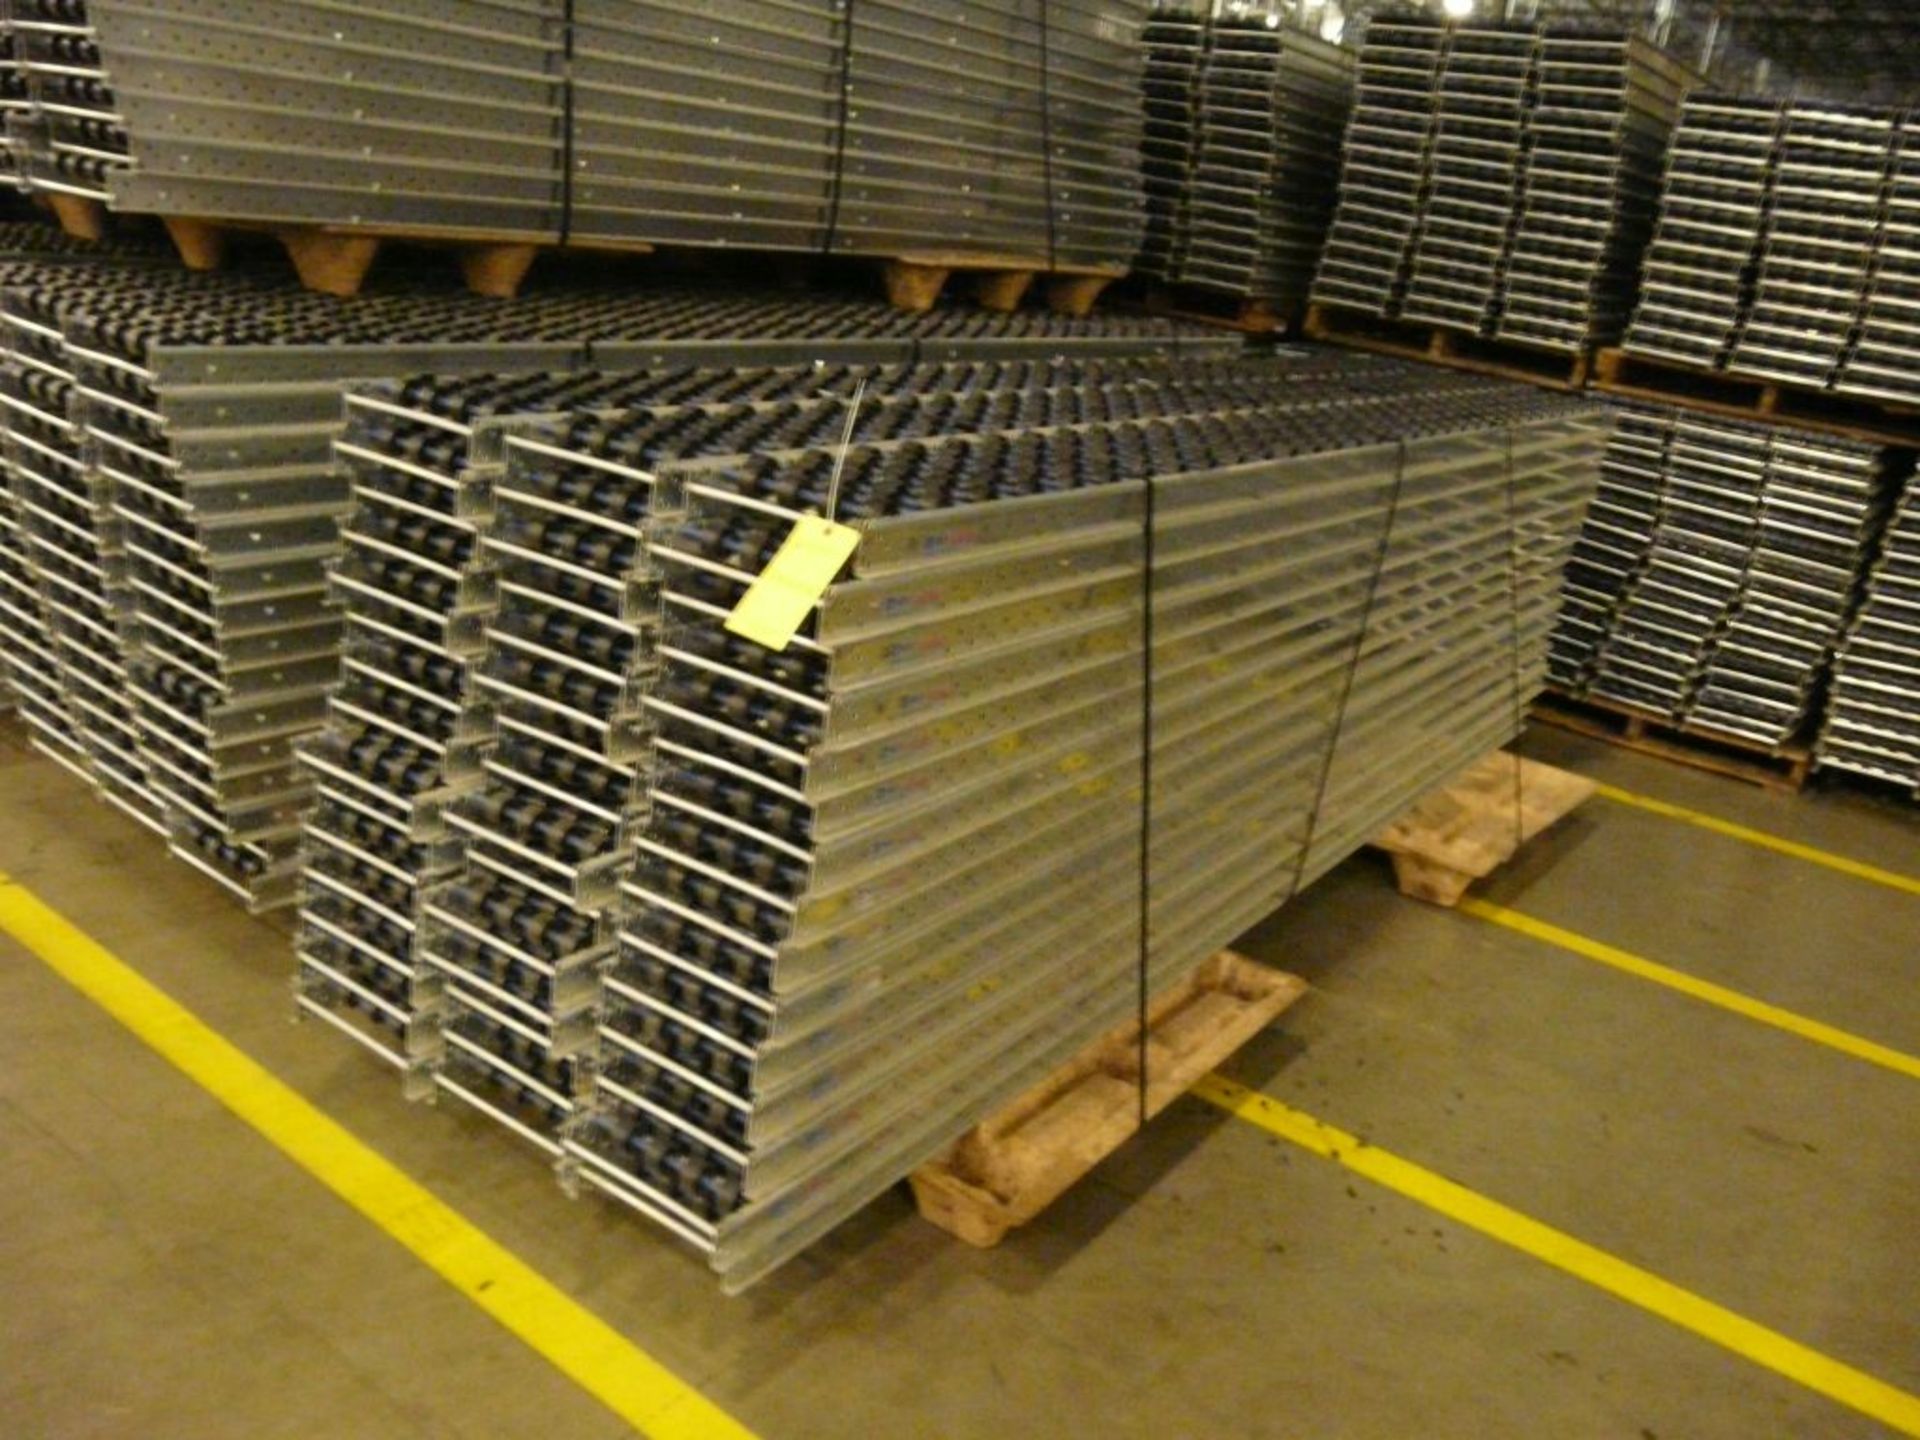 Lot of (90) SpanTrack Wheelbed Carton Flow Conveyors - 11.5'L x 11"W; Tag: 224214 - $30 Lot